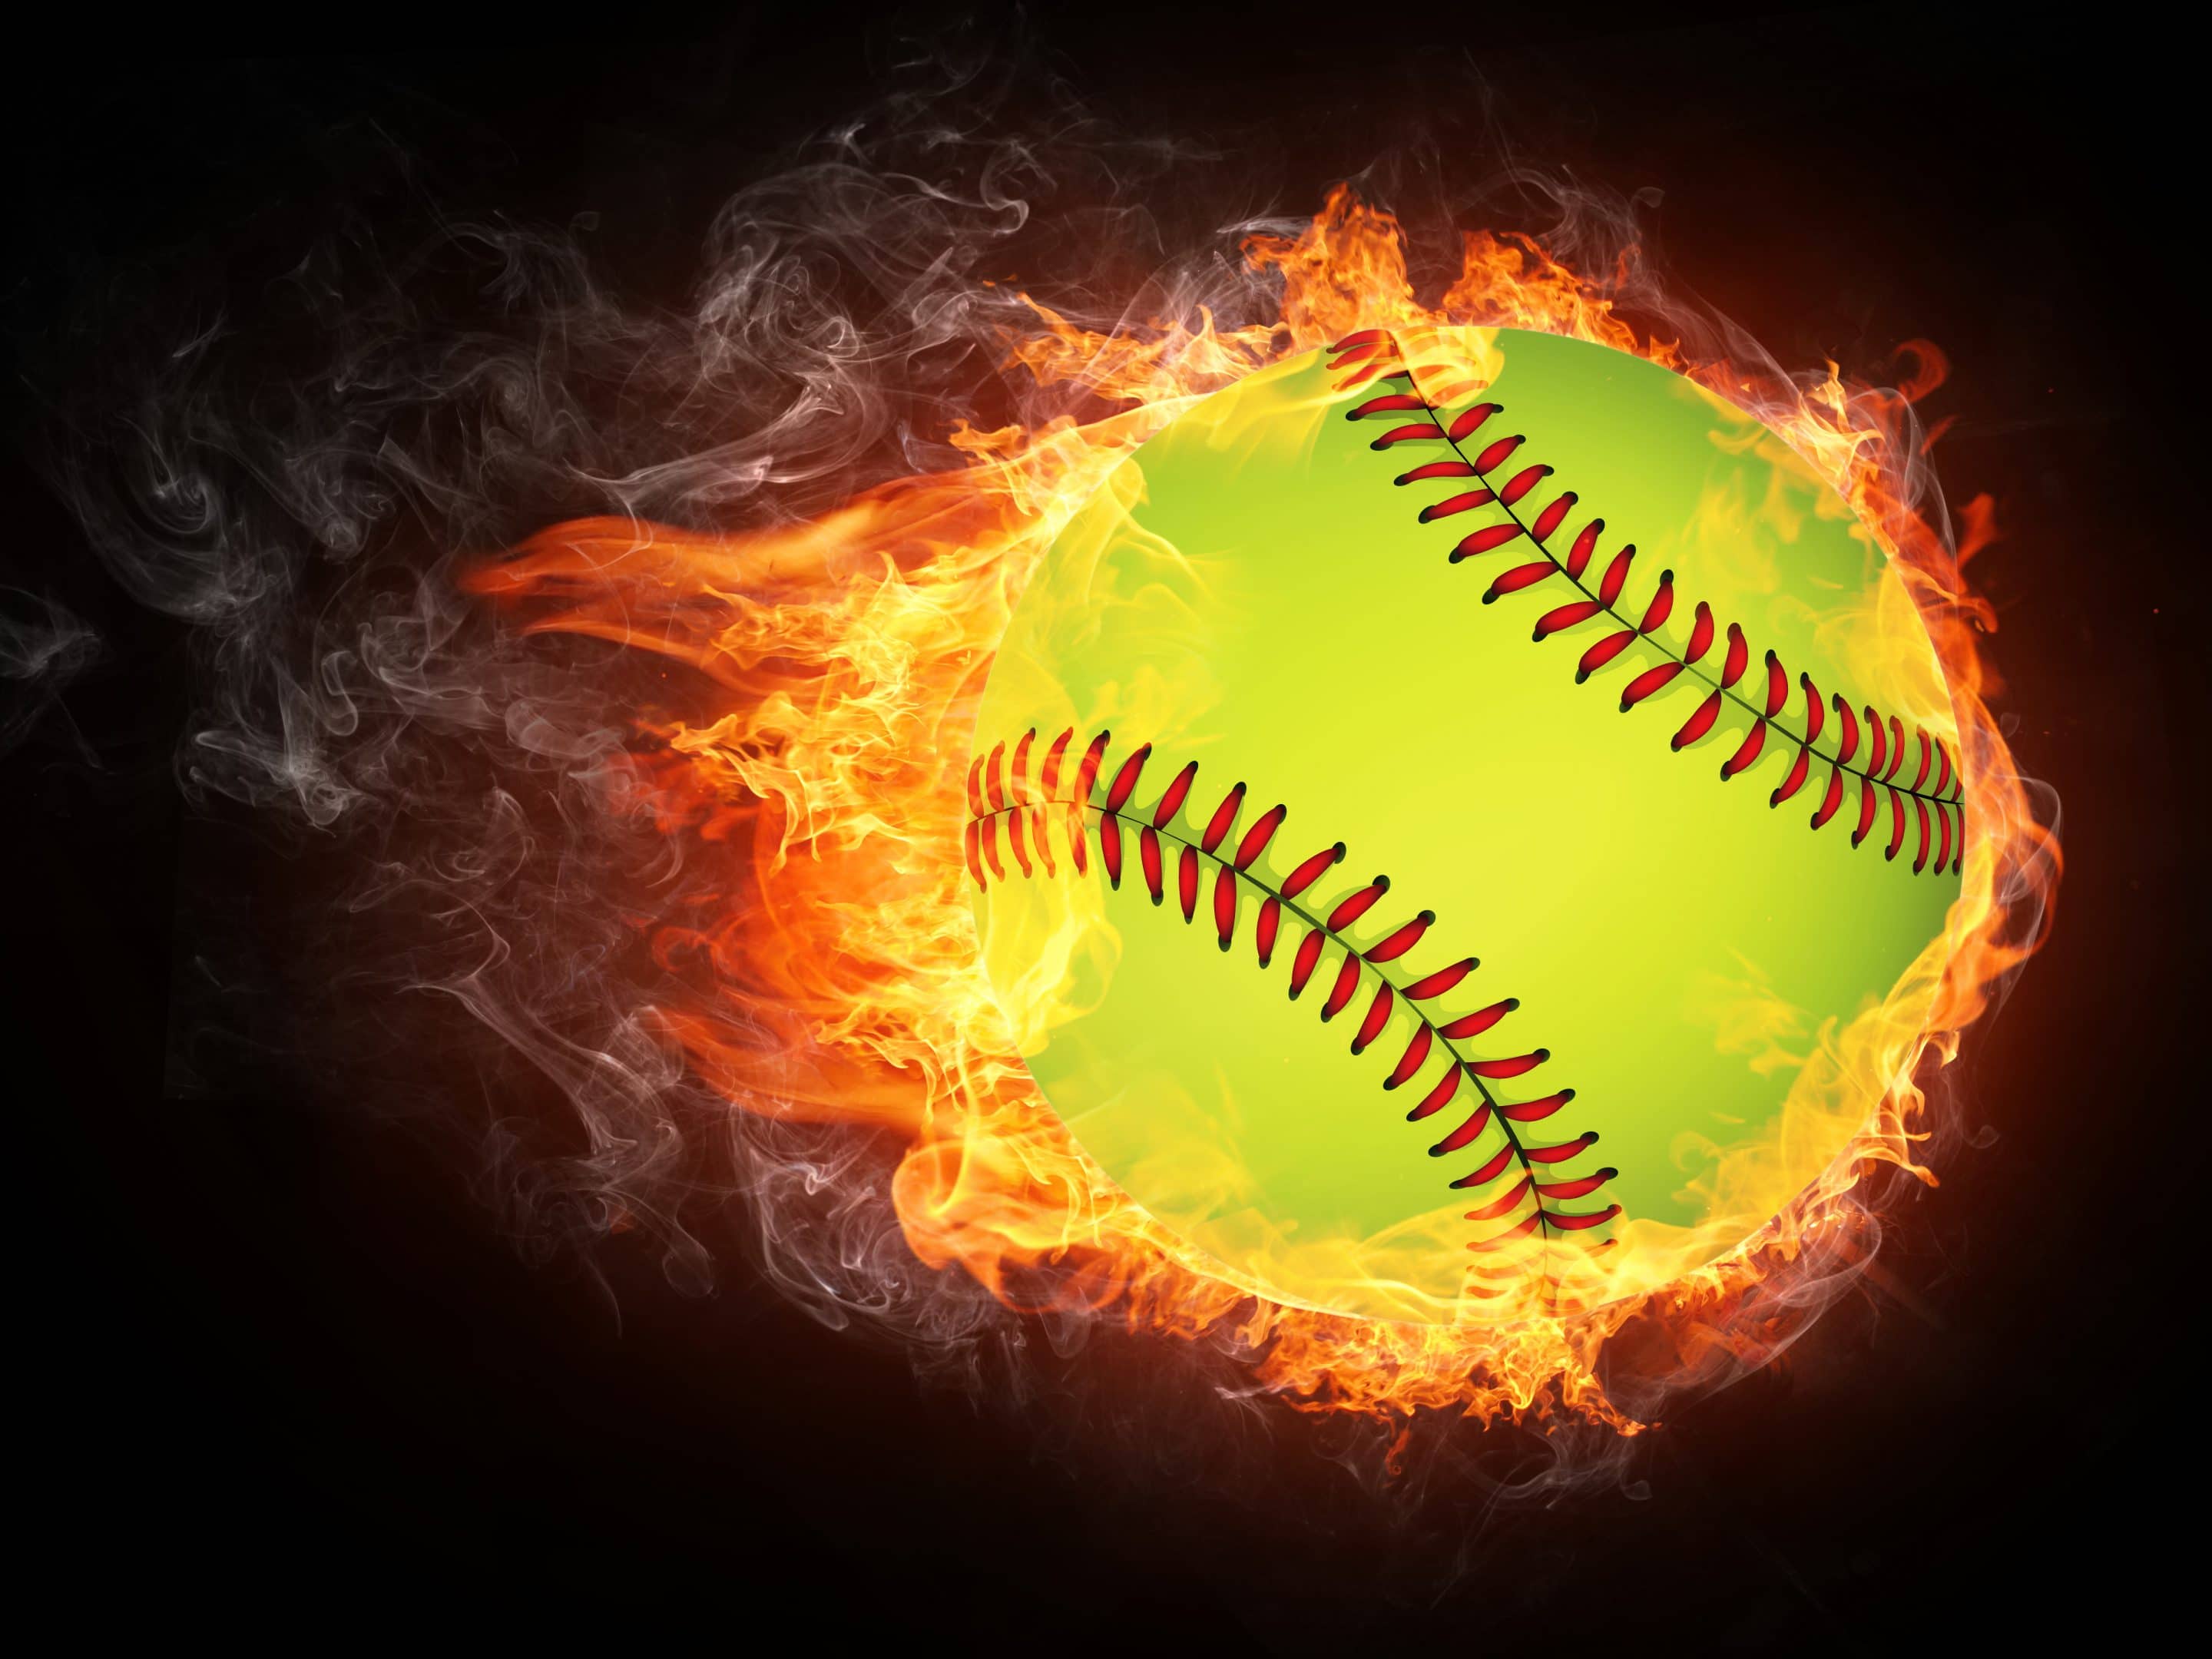 Wallpaper Iphone Softball Quotes  cescledubr